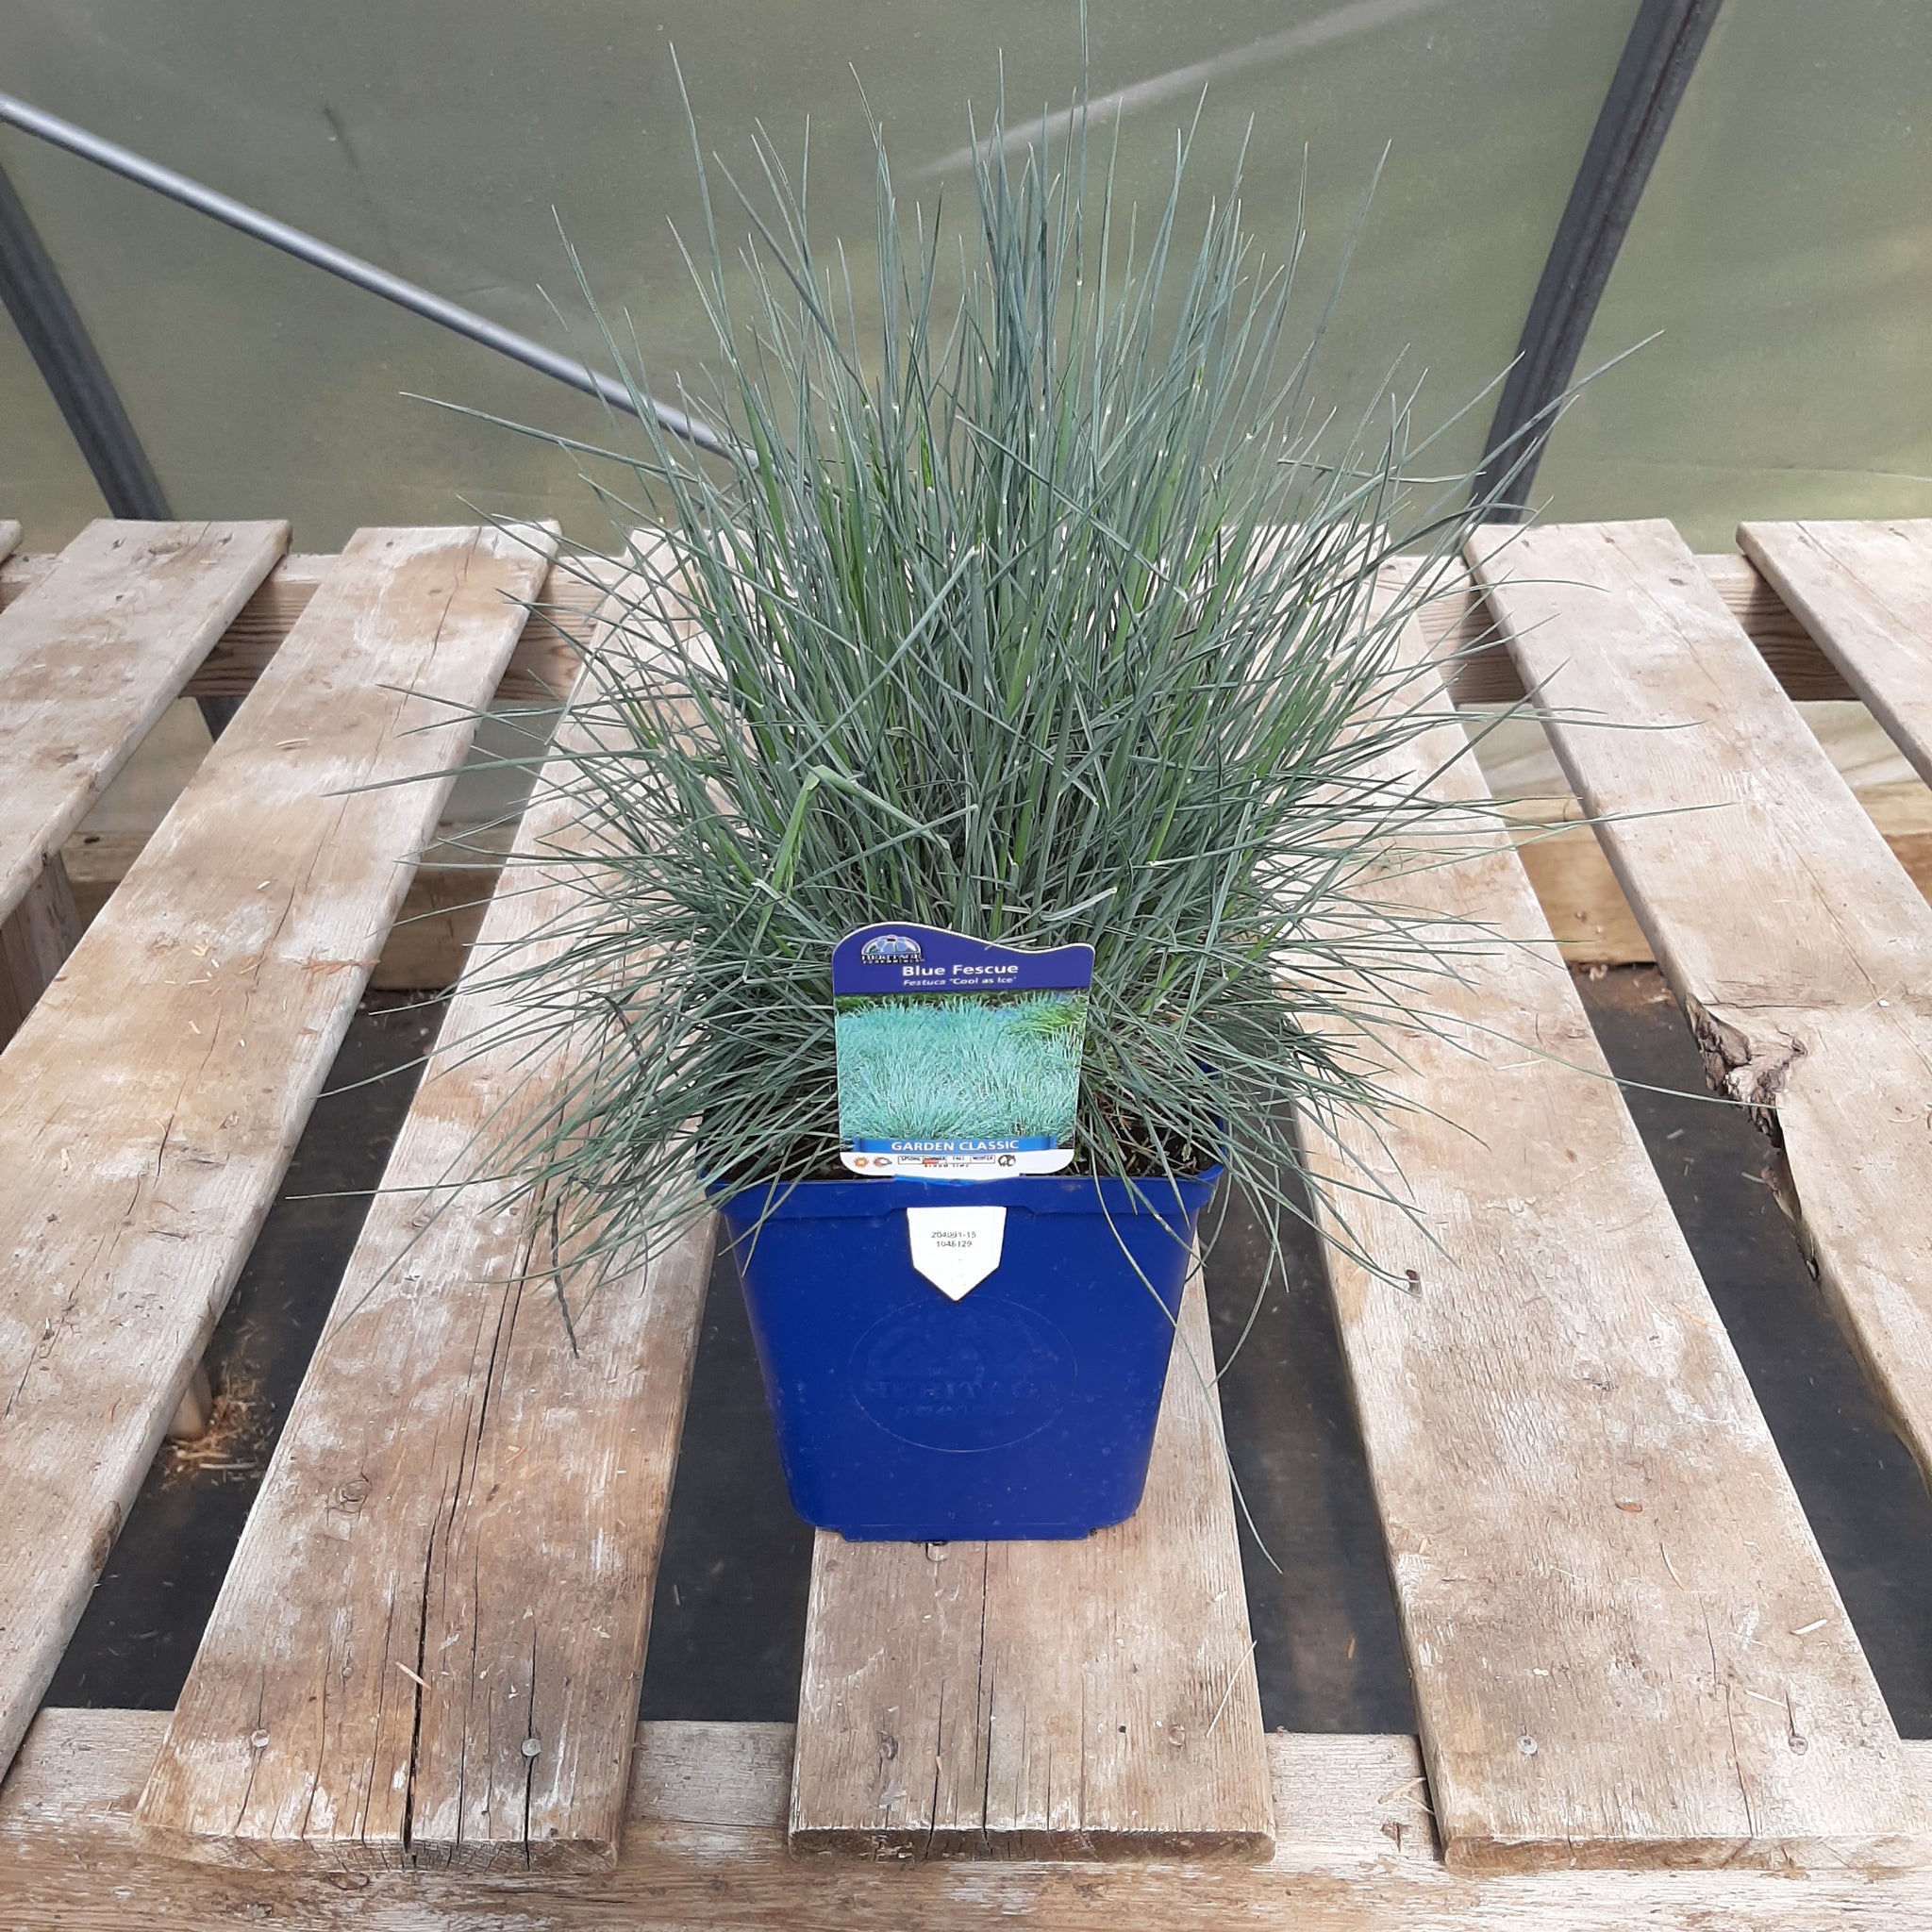 Blue Fescue Grass 'Cool as Ice'